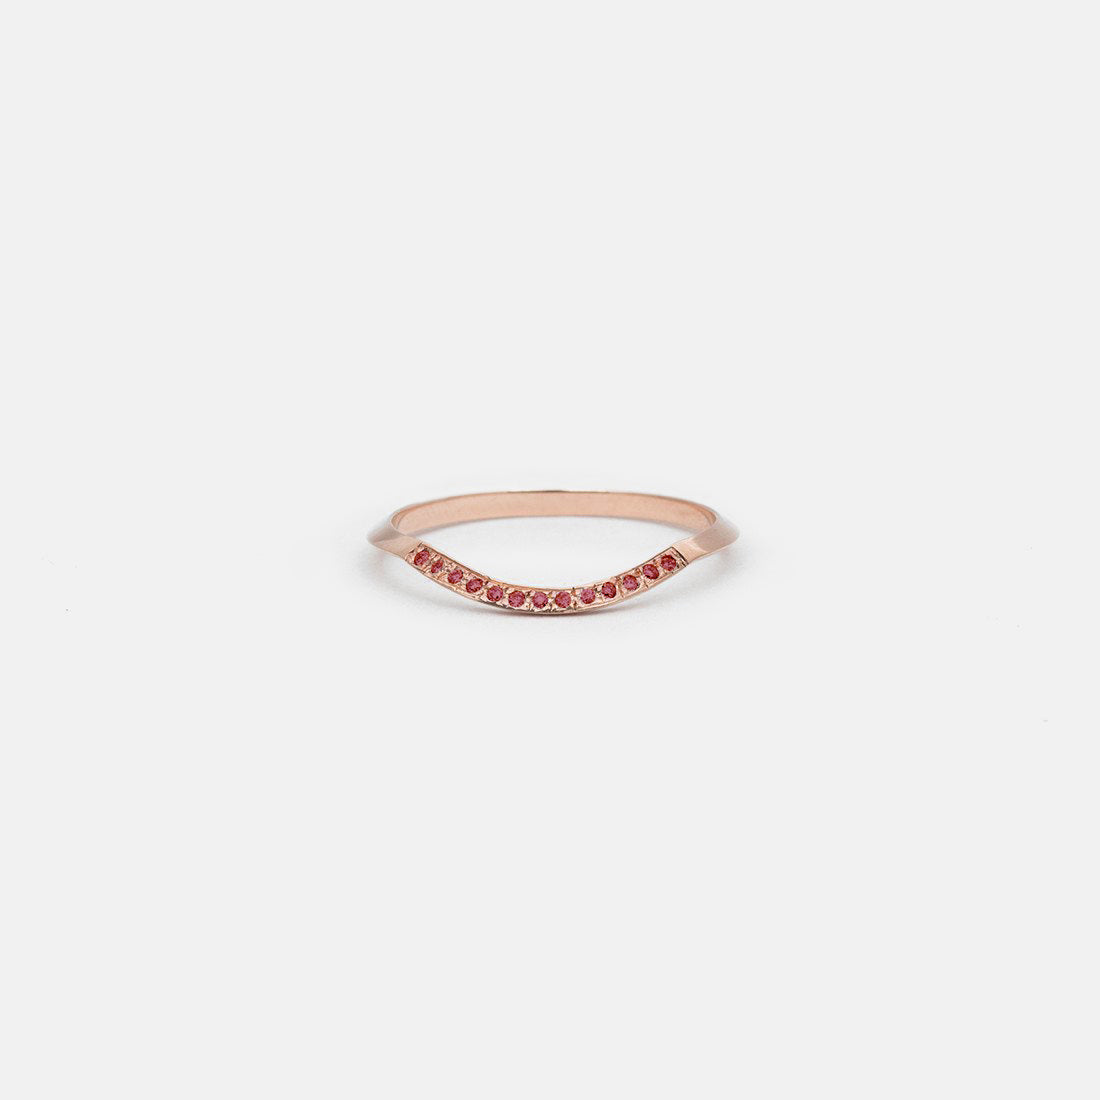 Arba Thin Ring in 14k Rose Gold set with Rubies By SHW Fine Jewelry New York City